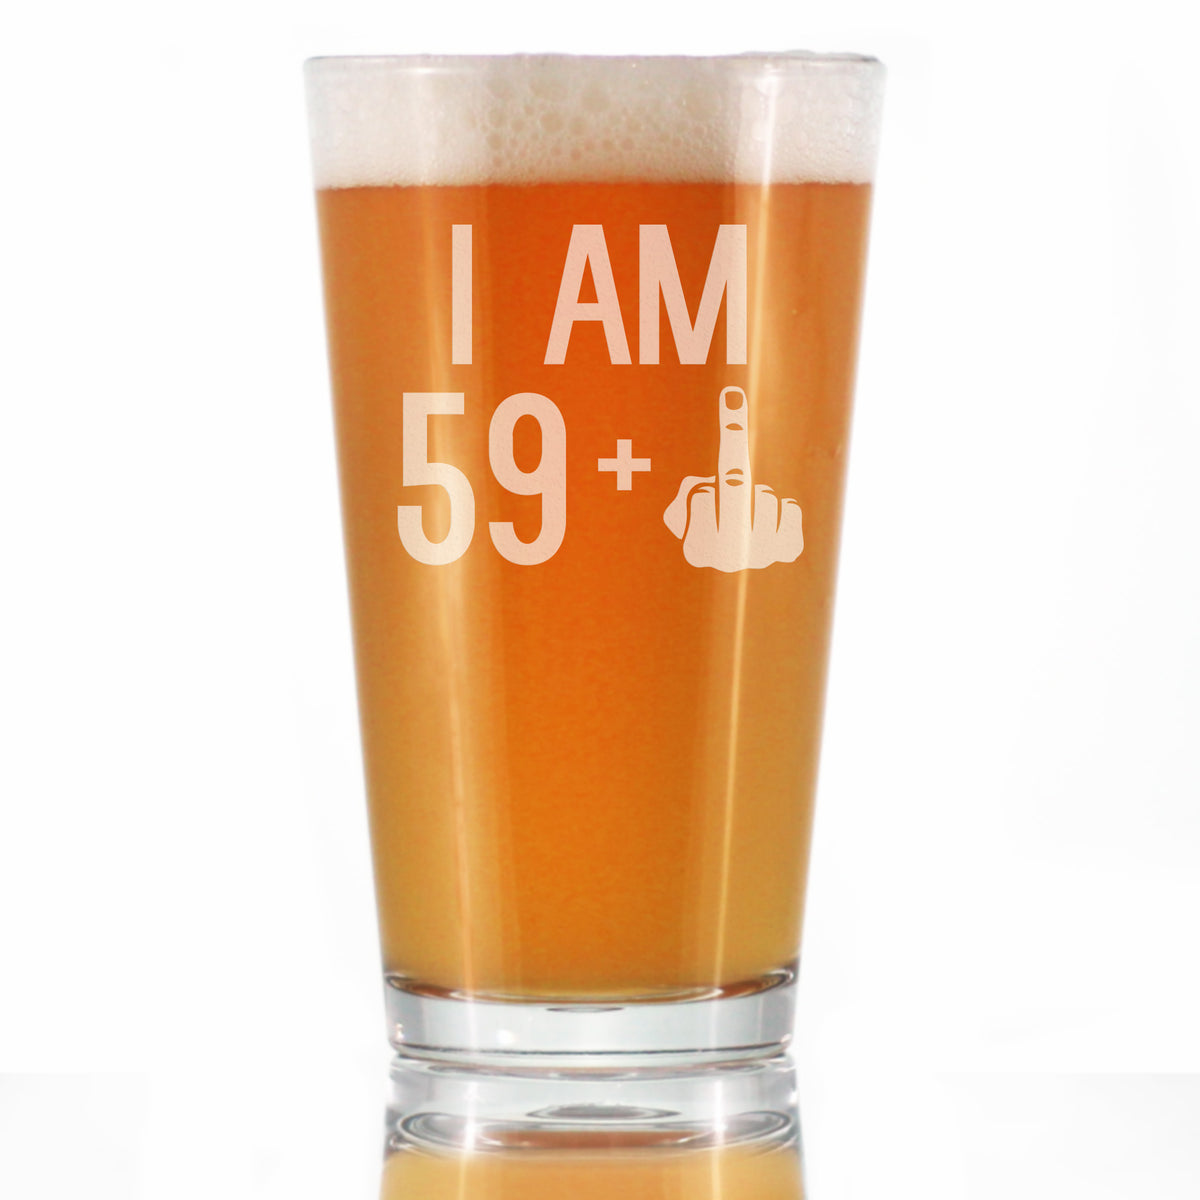 59 + 1 Middle Finger - 16 oz Pint Glass for Beer - Funny 60th Birthday Gifts for Men and Women Turning 60